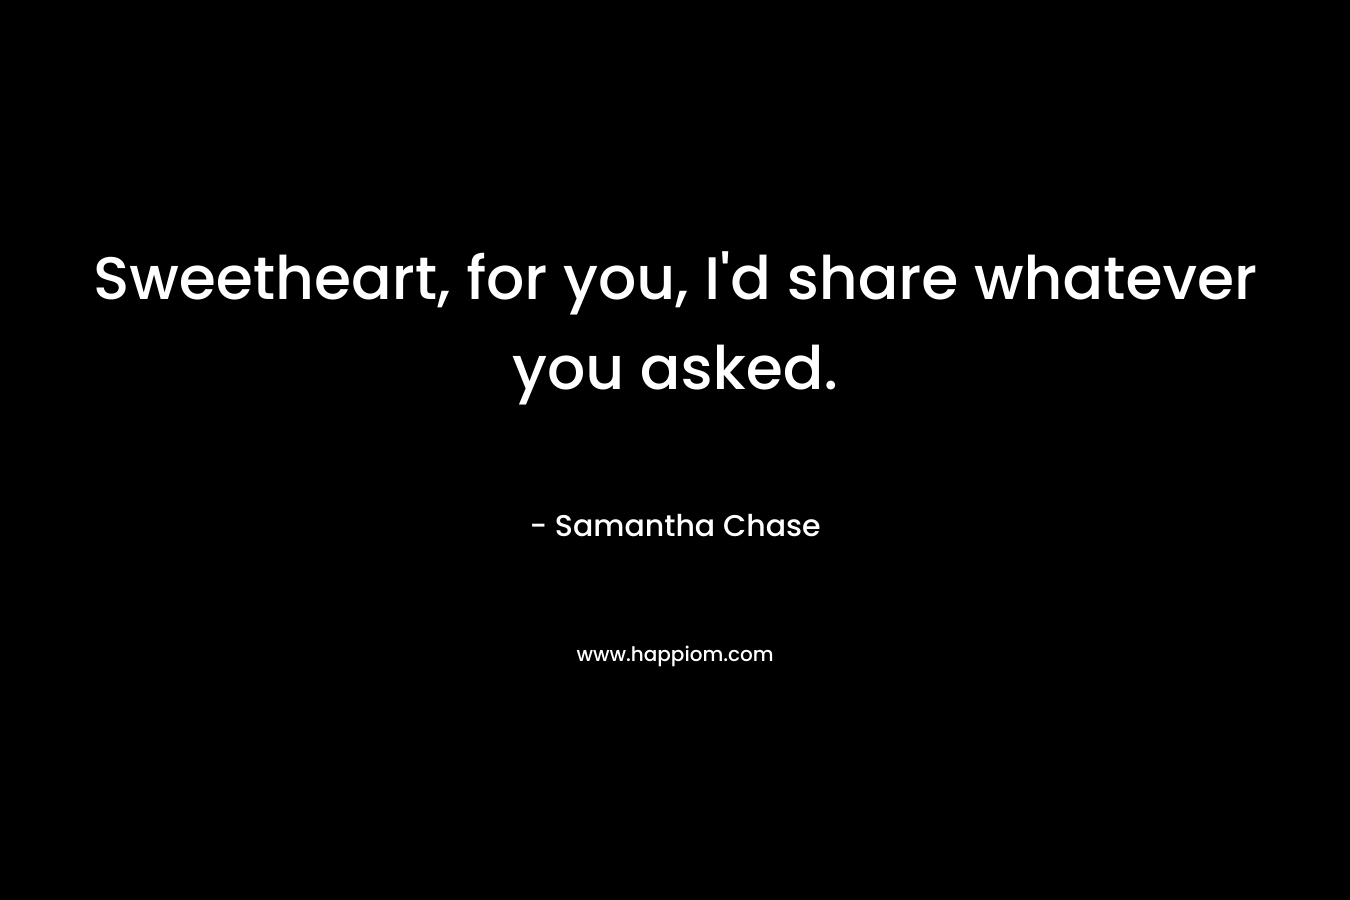 Sweetheart, for you, I’d share whatever you asked. – Samantha Chase